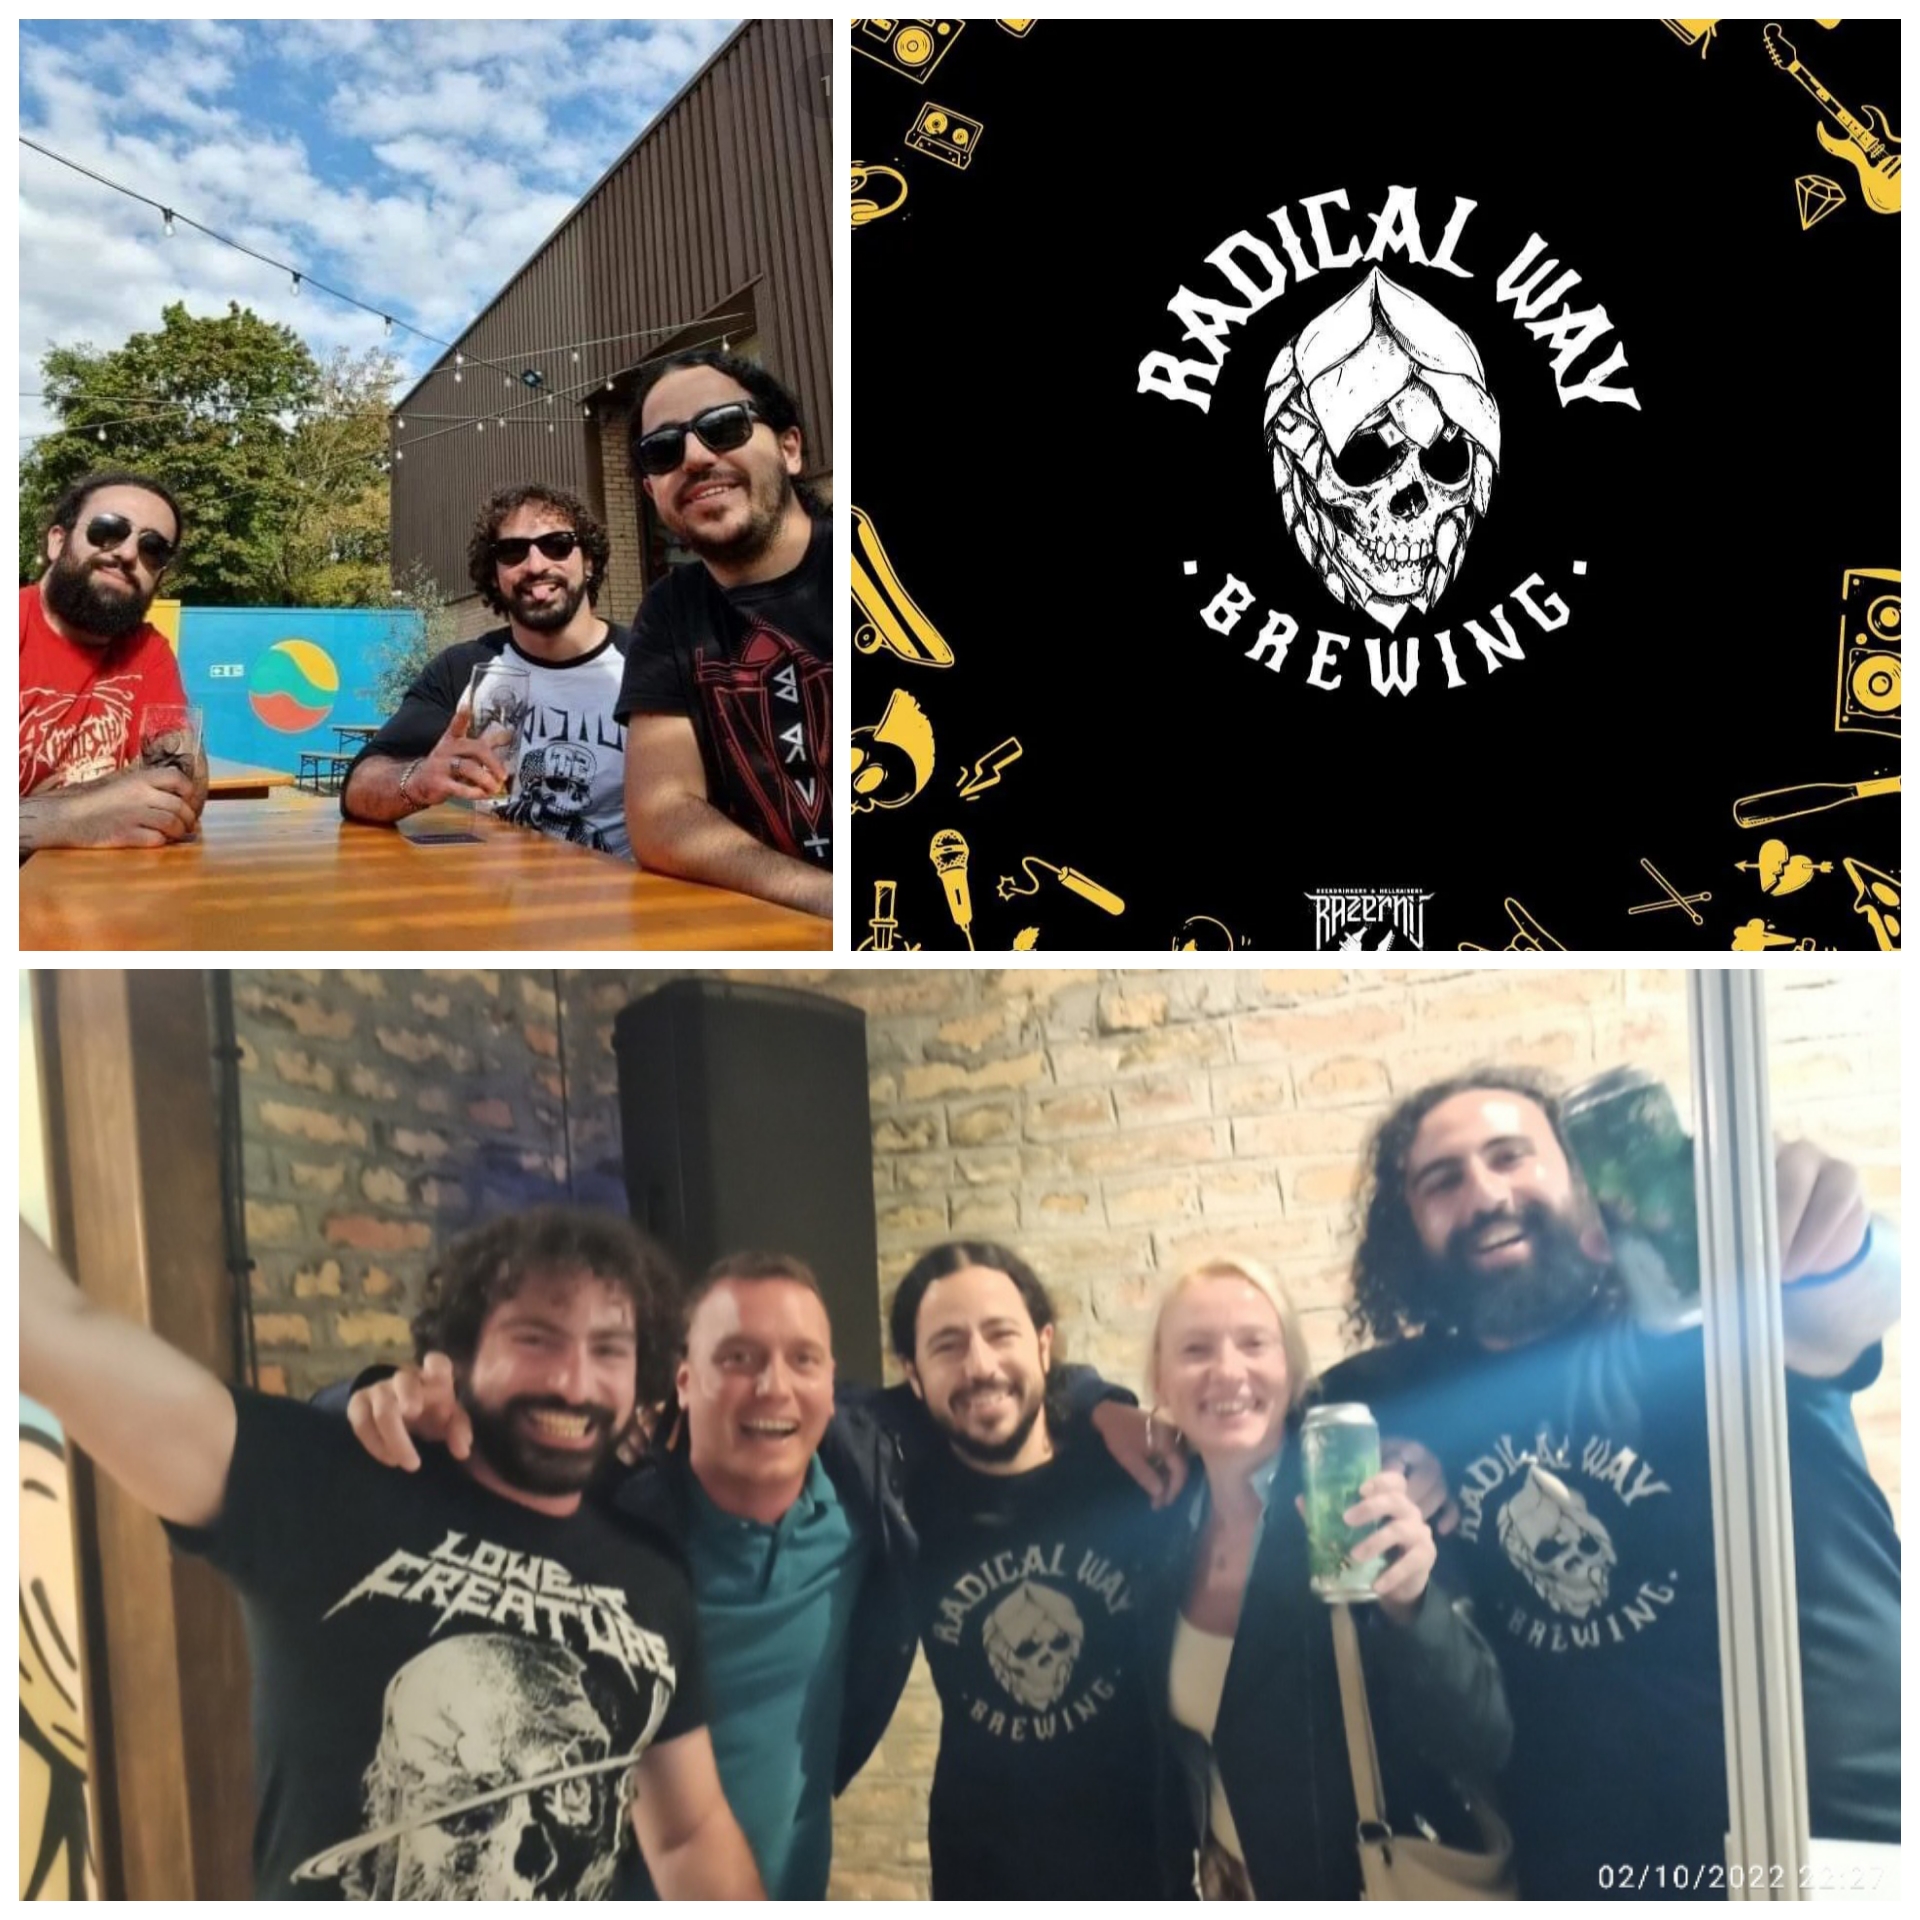 Very warm welcome to brothers -  Radical Way Brewing, a nomadic brewery from Cyprus